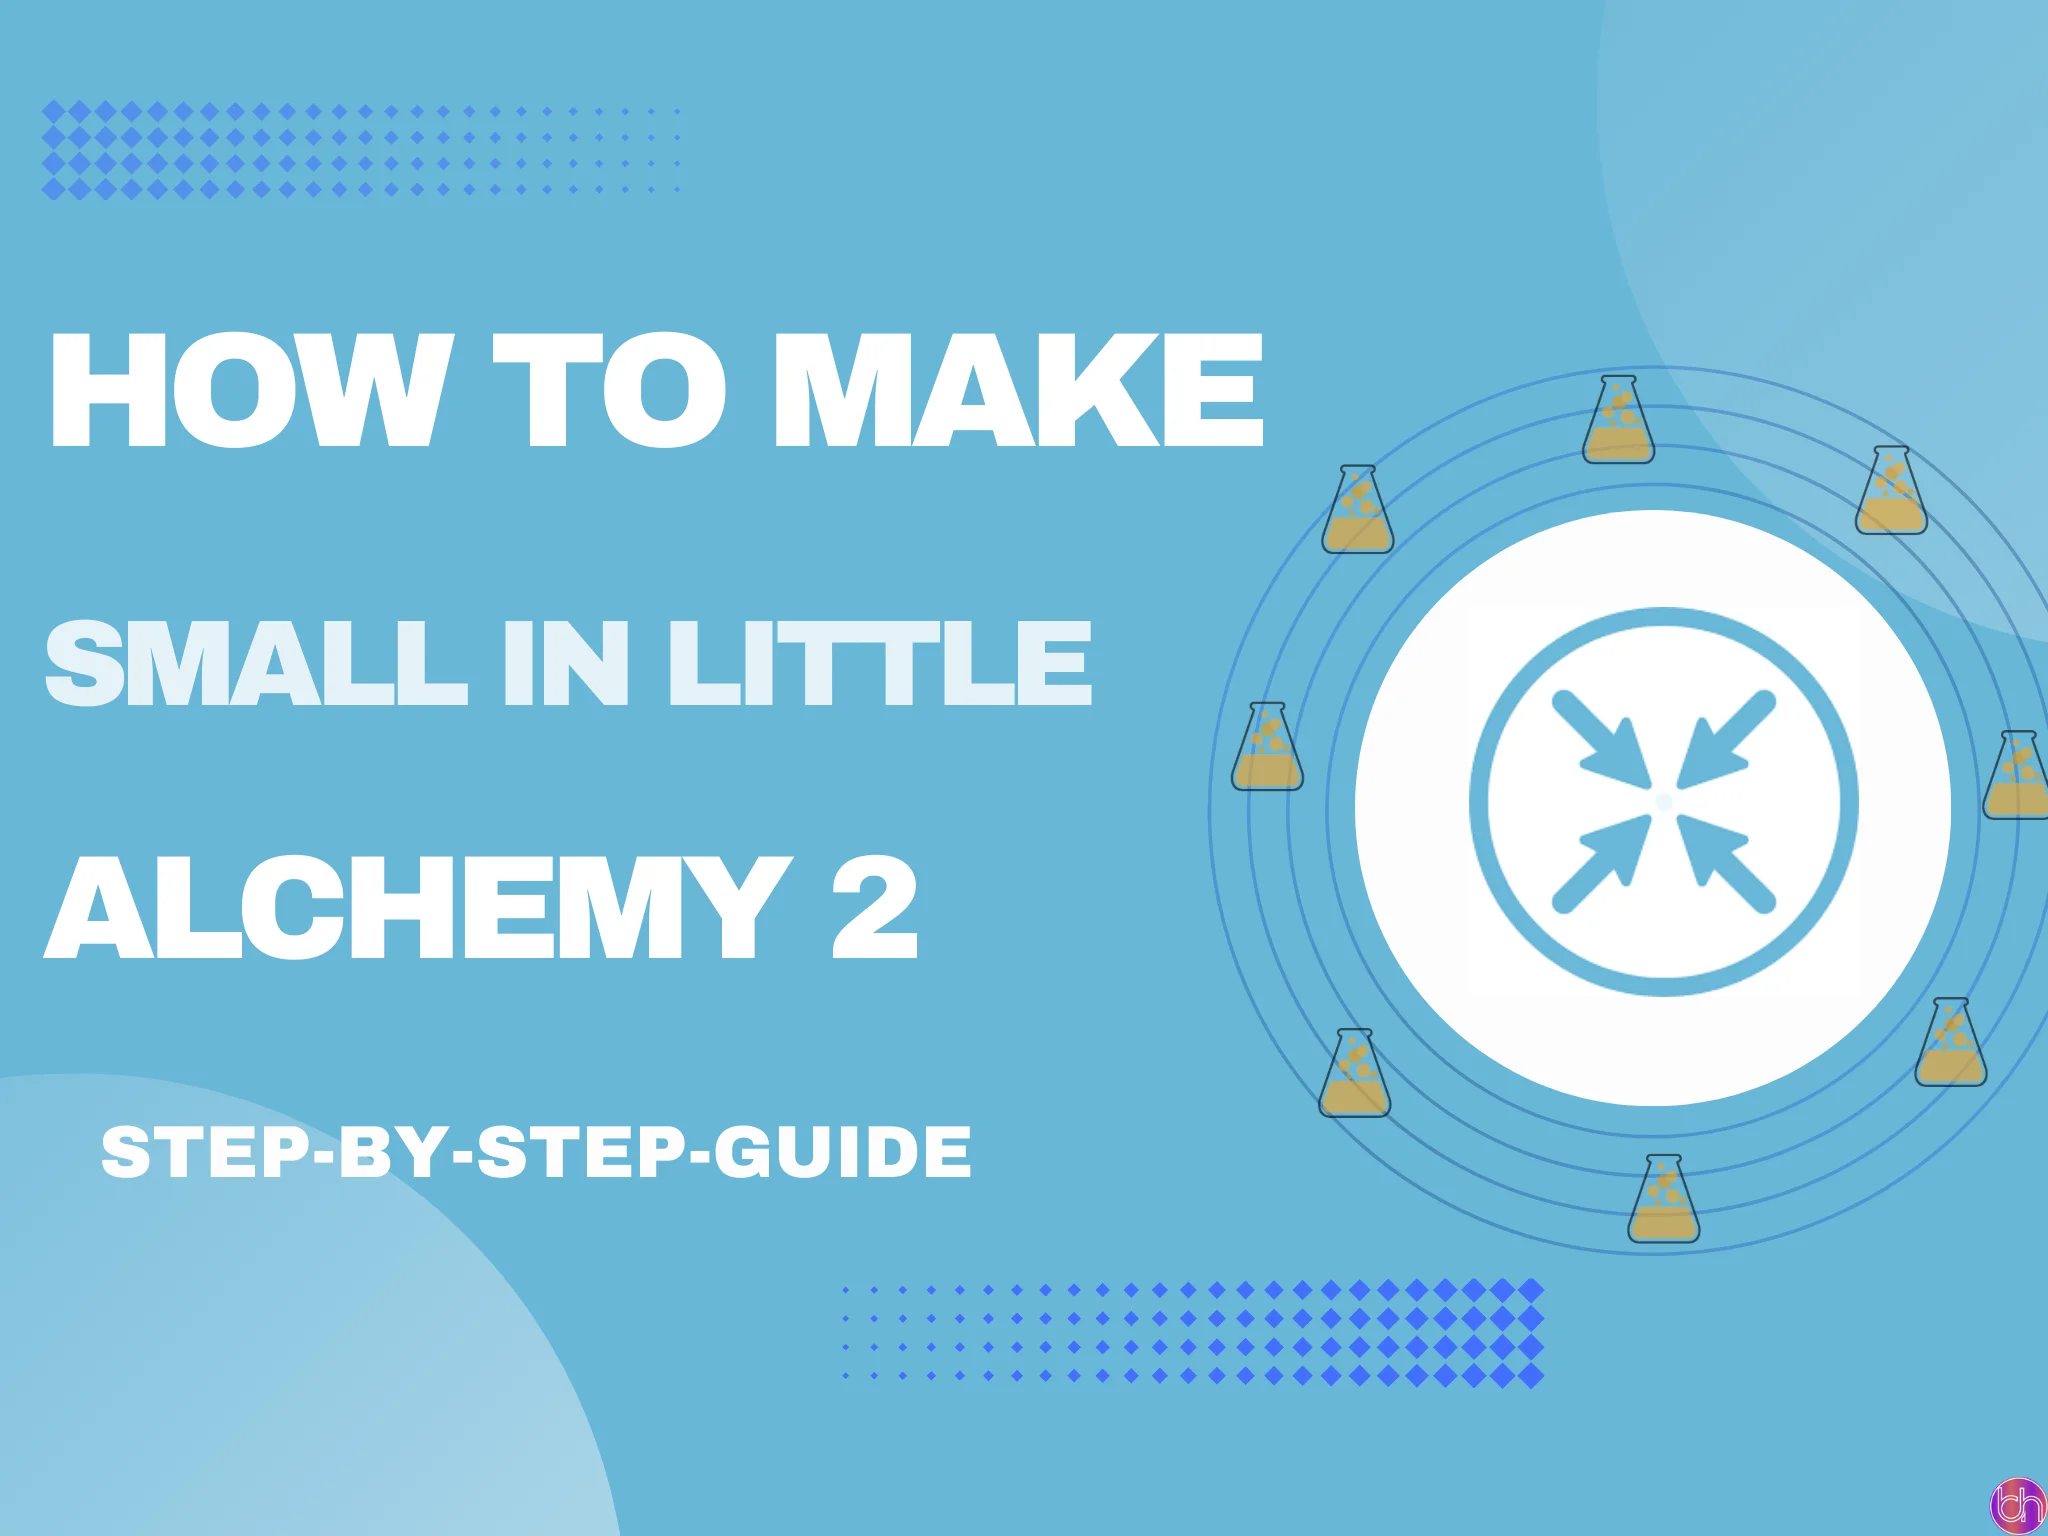 How to make small in little alchemy 2